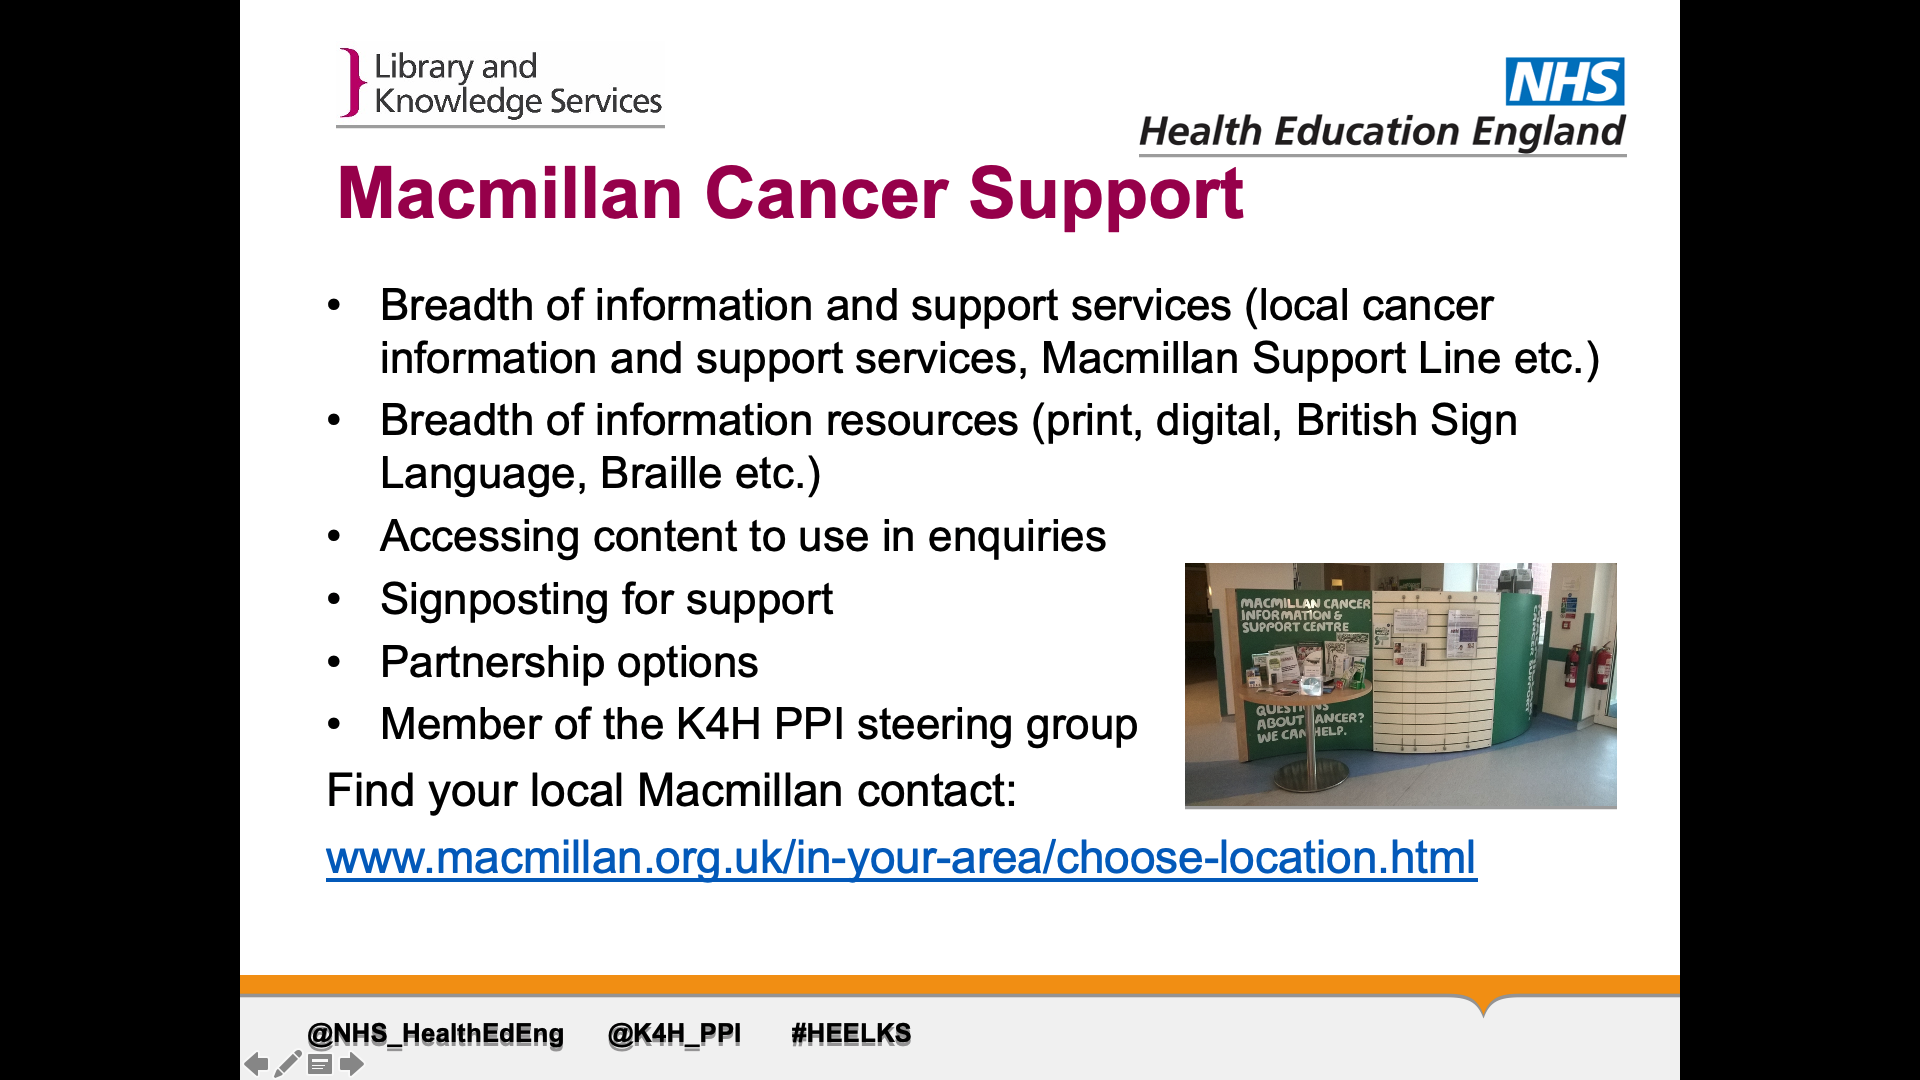 Title: Macmillan Cancer Support Text on page: 1.Breadth of information and support services (local cancer information and support services, Macmillan Support Line etc.) 2. Breadth of information resources (print, digital, British Sign Language, Braille etc.) 3. Accessing content to use in enquiries 4. Signposting for support 5. Partnership options 6. Member of the K4H PPI steering group Find your local Macmillan contact on their website (link in image description)